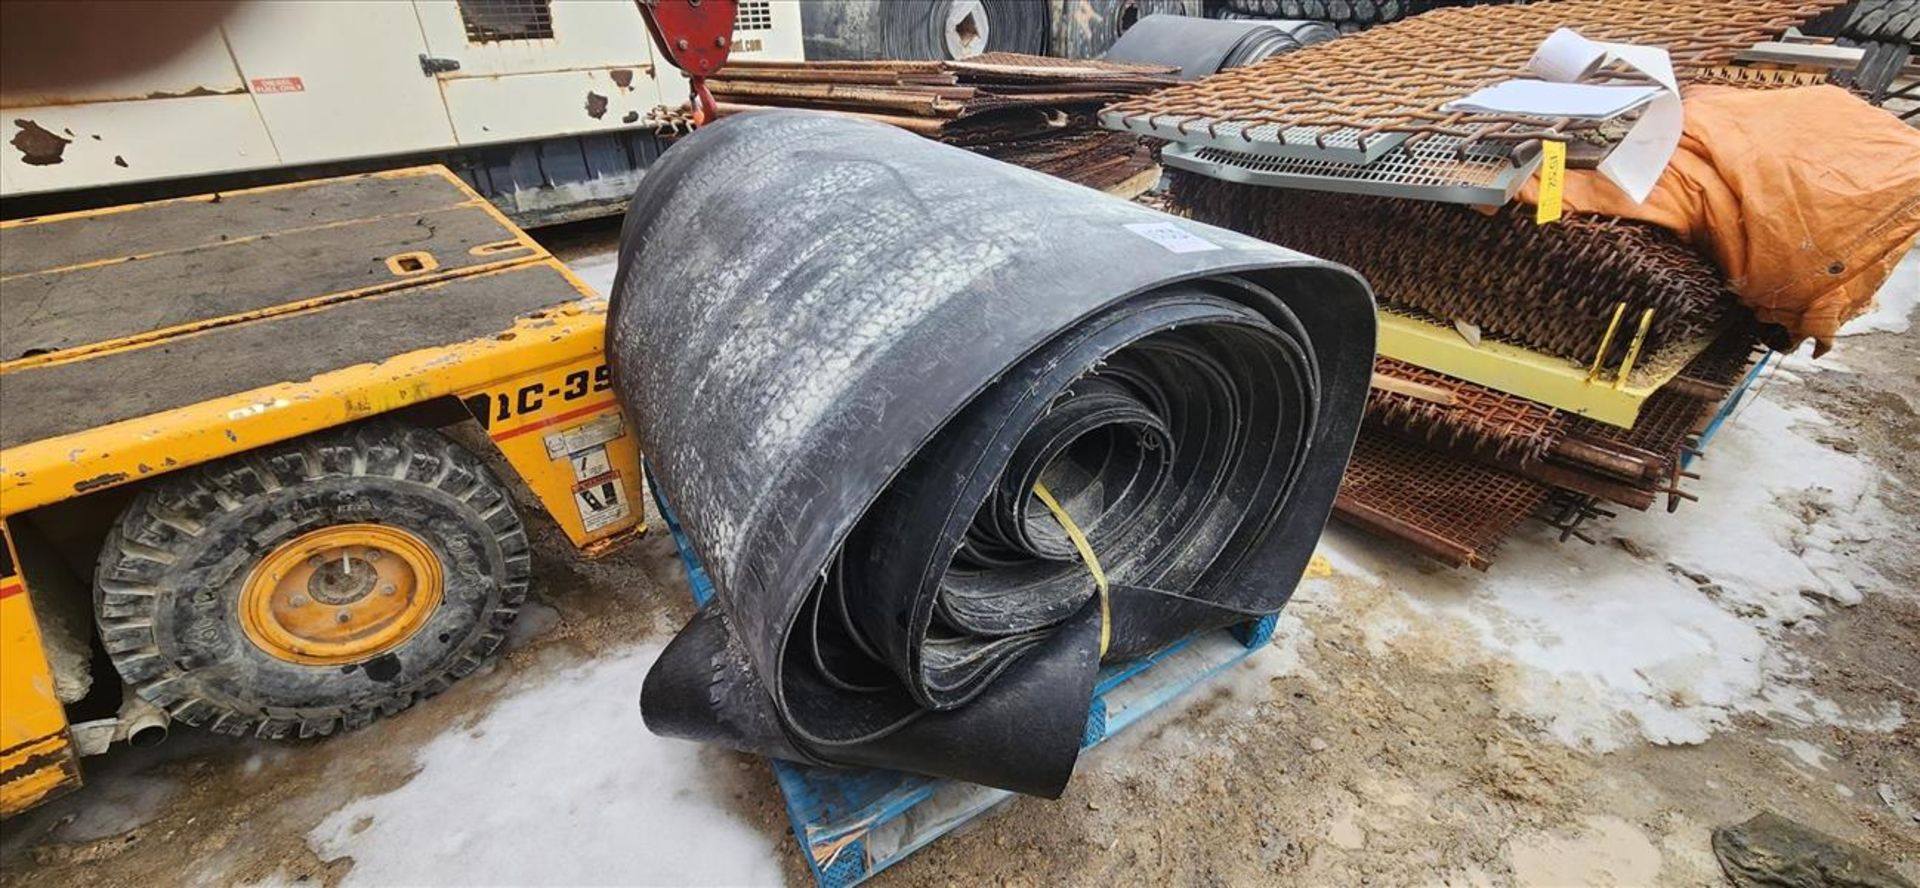 partial roll of conveyor belting, approx. 35 in. x 1/4 in. x 36 in. dia. (Subject to confirmation.